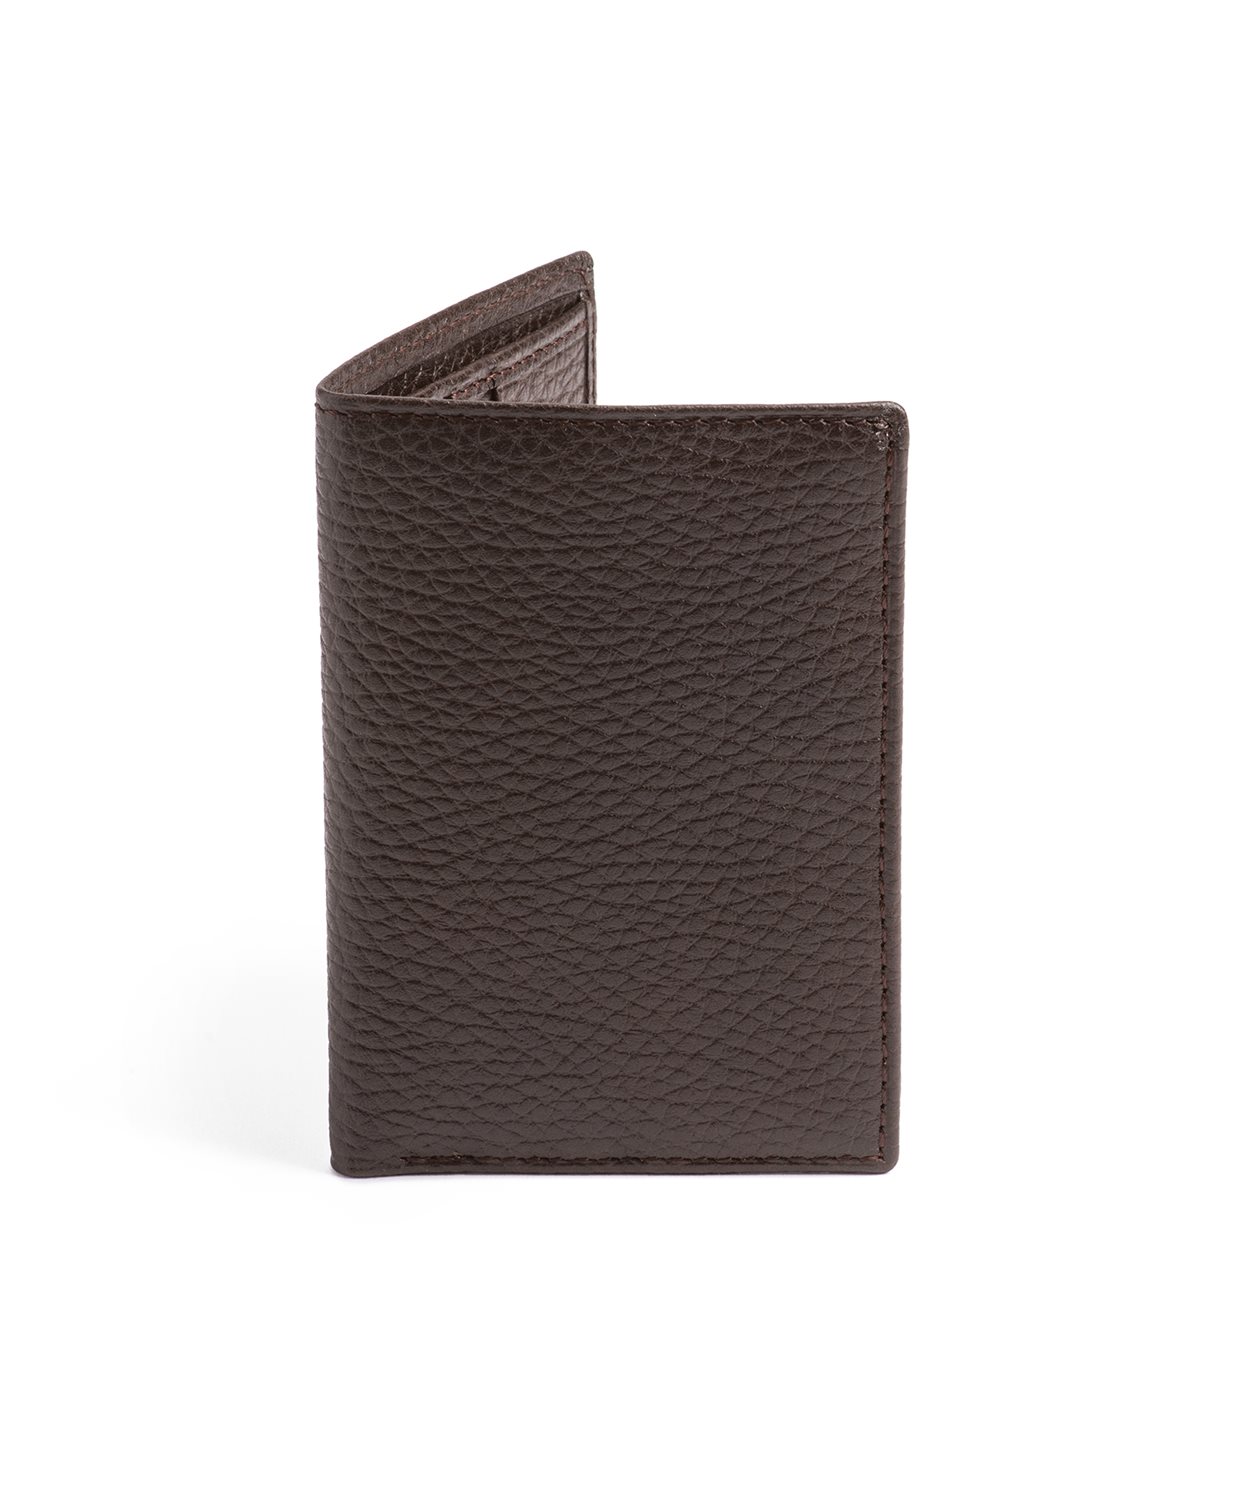 Palmgrens - Folded Card Holder - Genuine handcrafted leather since 1896